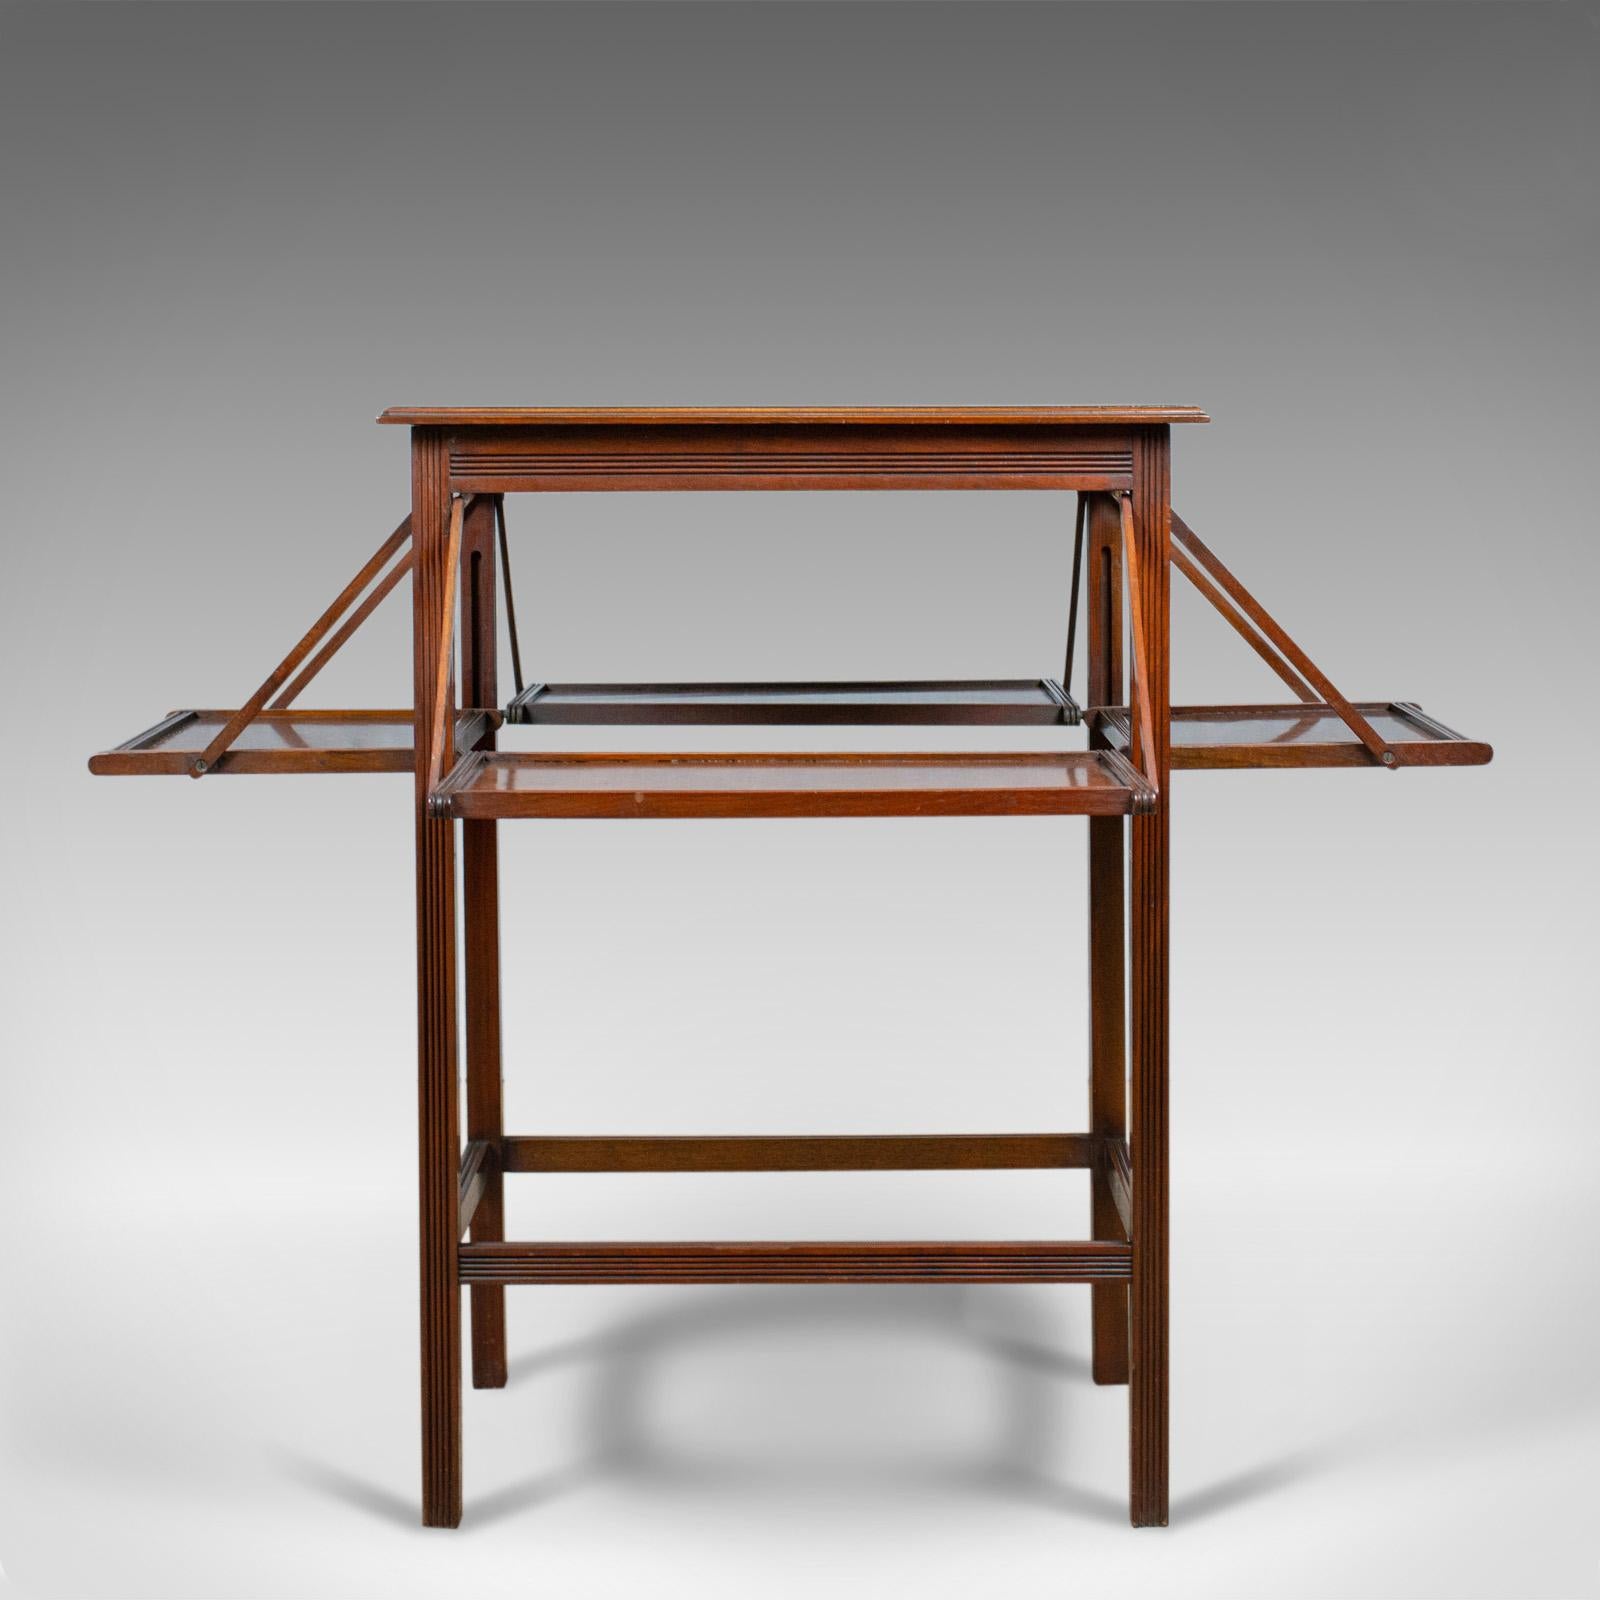 This is an antique tea table. An English, Edwardian, walnut cake stand with four folding leaves dating to the early 20th century, circa 1910.

Warm hues to the English walnut
Good consistent color with grain interest throughout
Wax polished